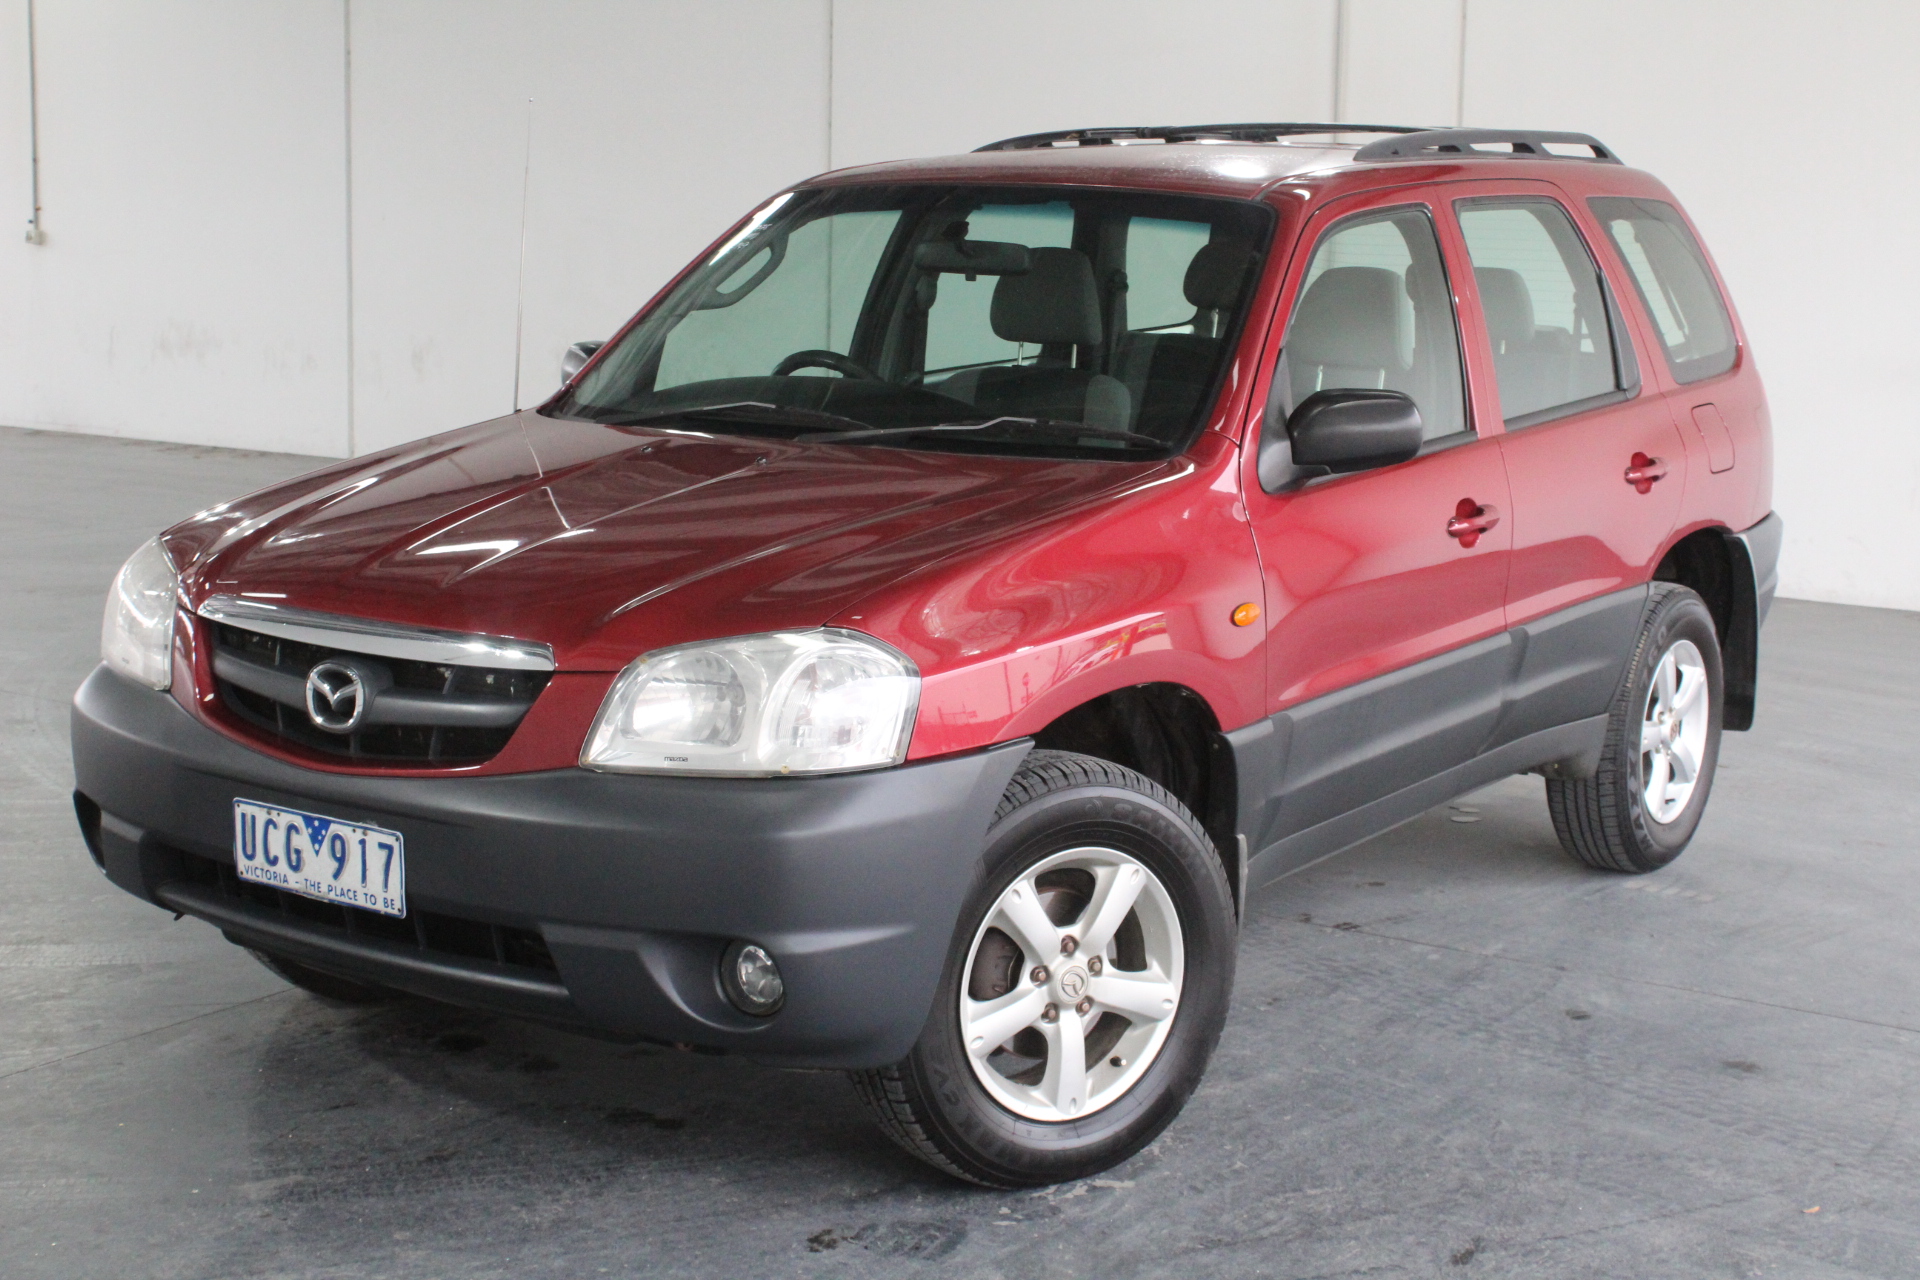 2005 Mazda Tribute Limited Sport Automatic Wagon Auction 0001 3447100